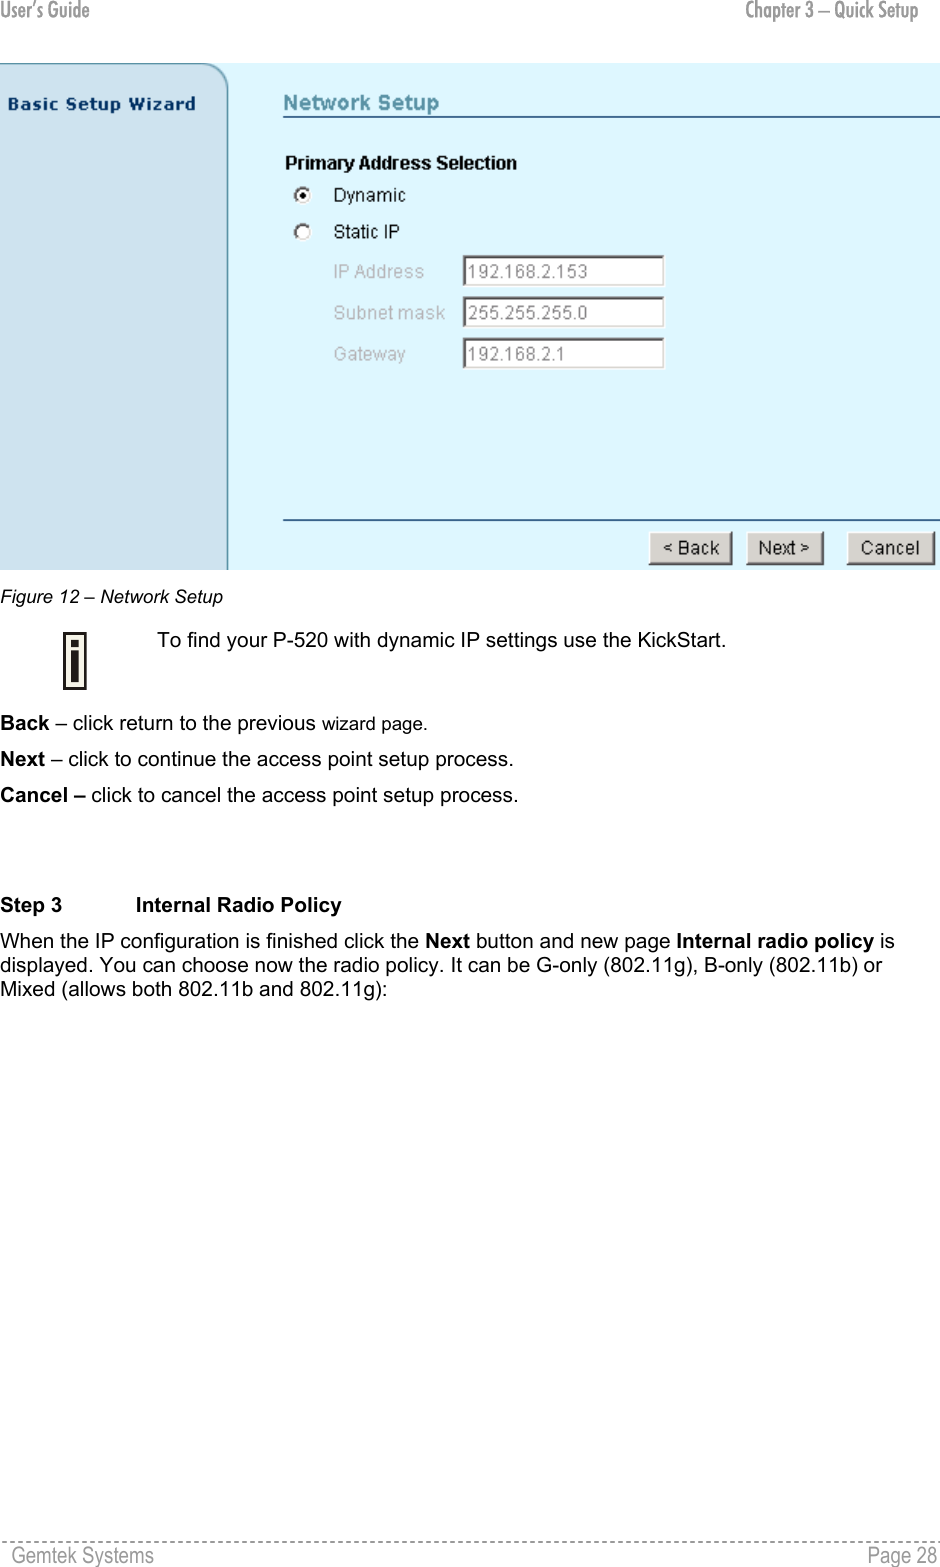 User’s Guide  Chapter 3 – Quick Setup  Figure 12 – Network Setup   To find your P-520 with dynamic IP settings use the KickStart. Back – click return to the previous wizard page. Next – click to continue the access point setup process. Cancel – click to cancel the access point setup process.   Step 3  Internal Radio Policy When the IP configuration is finished click the Next button and new page Internal radio policy is displayed. You can choose now the radio policy. It can be G-only (802.11g), B-only (802.11b) or Mixed (allows both 802.11b and 802.11g): Gemtek Systems    Page 28  